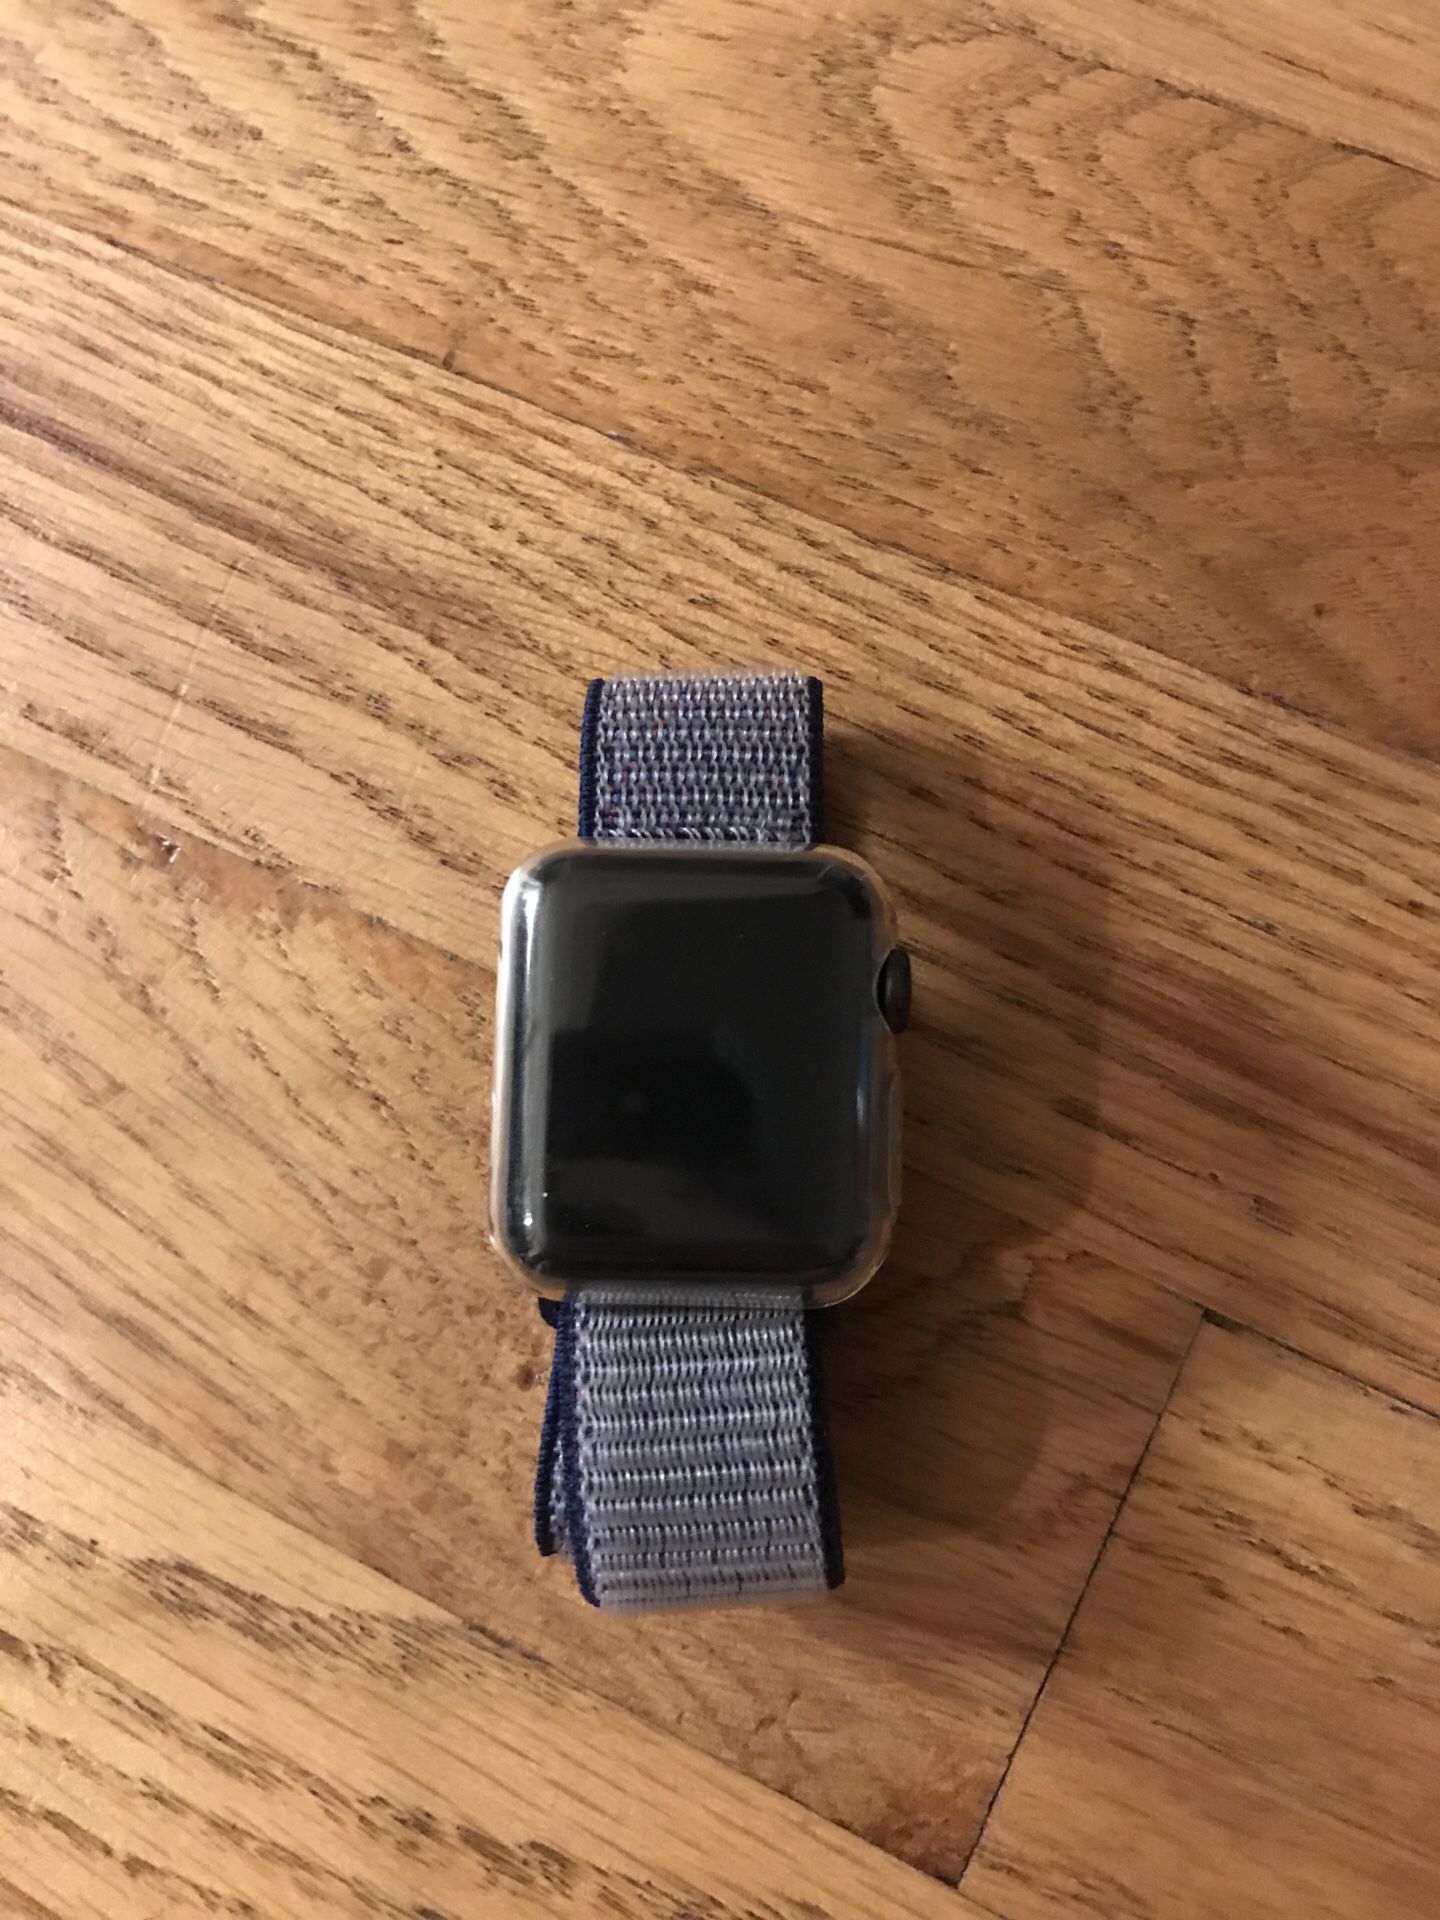 Apple Series 3 Watch 38mm Cellular+GPS+ bands